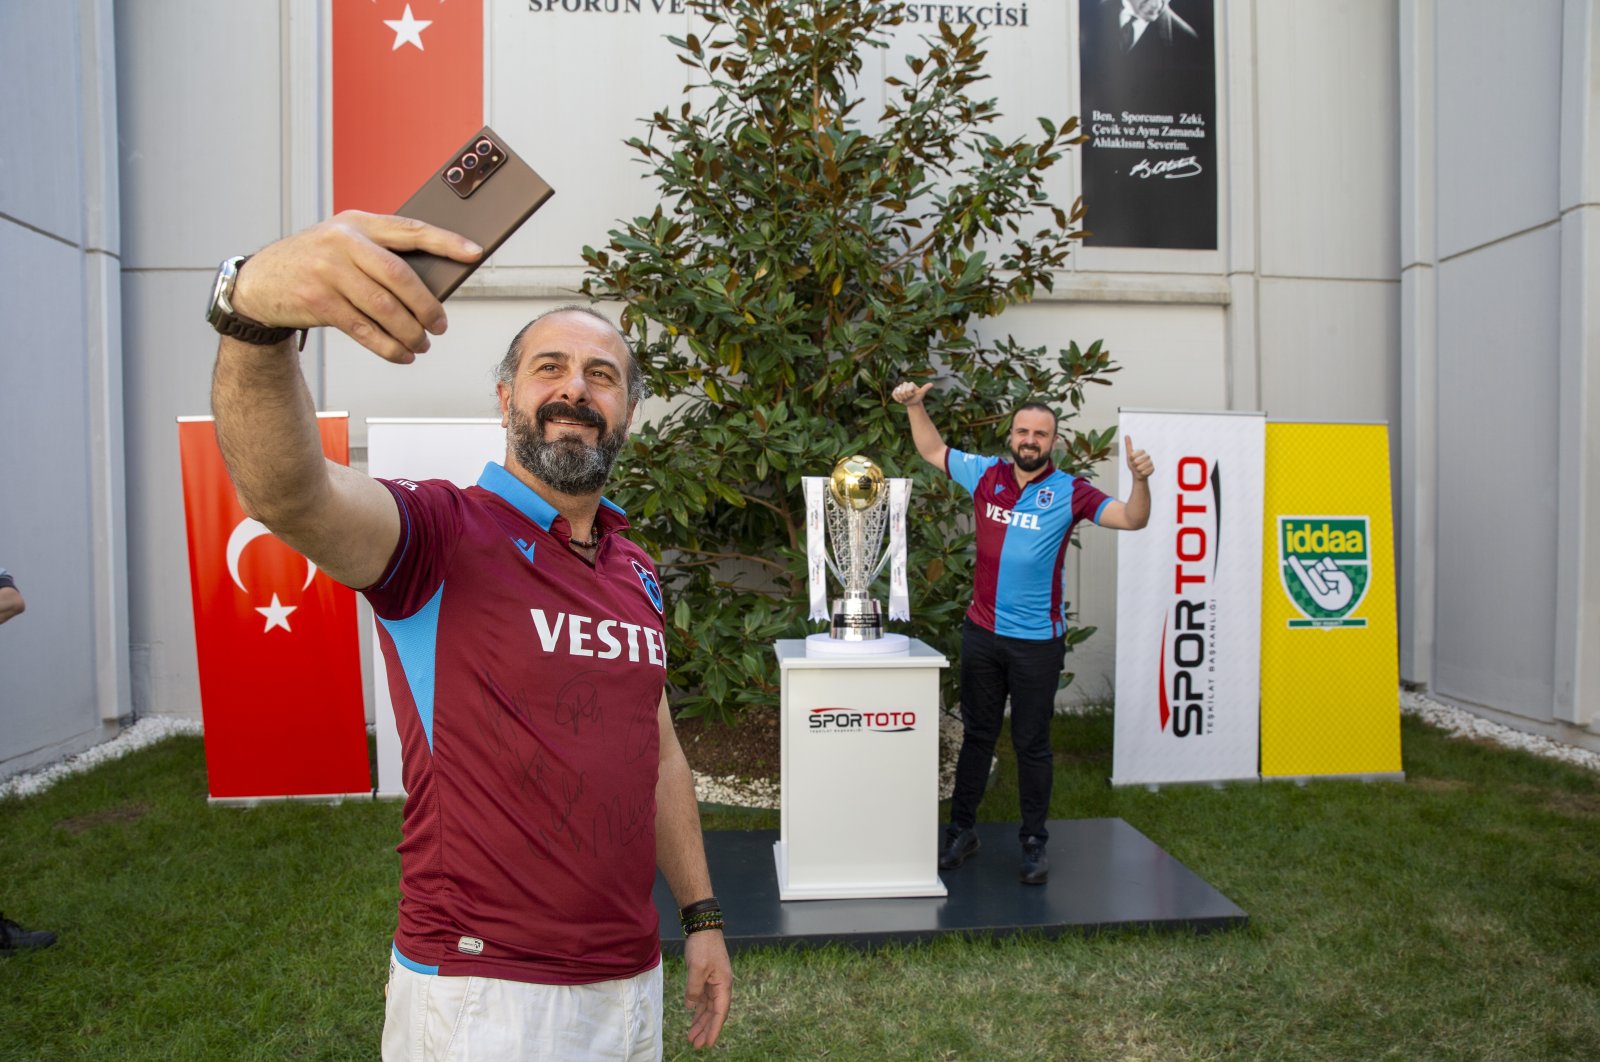 Two Trabzonspor fans pose with the Süper Lig trophy, Istanbul, Turkey, May 10, 2022. (AA Photo)